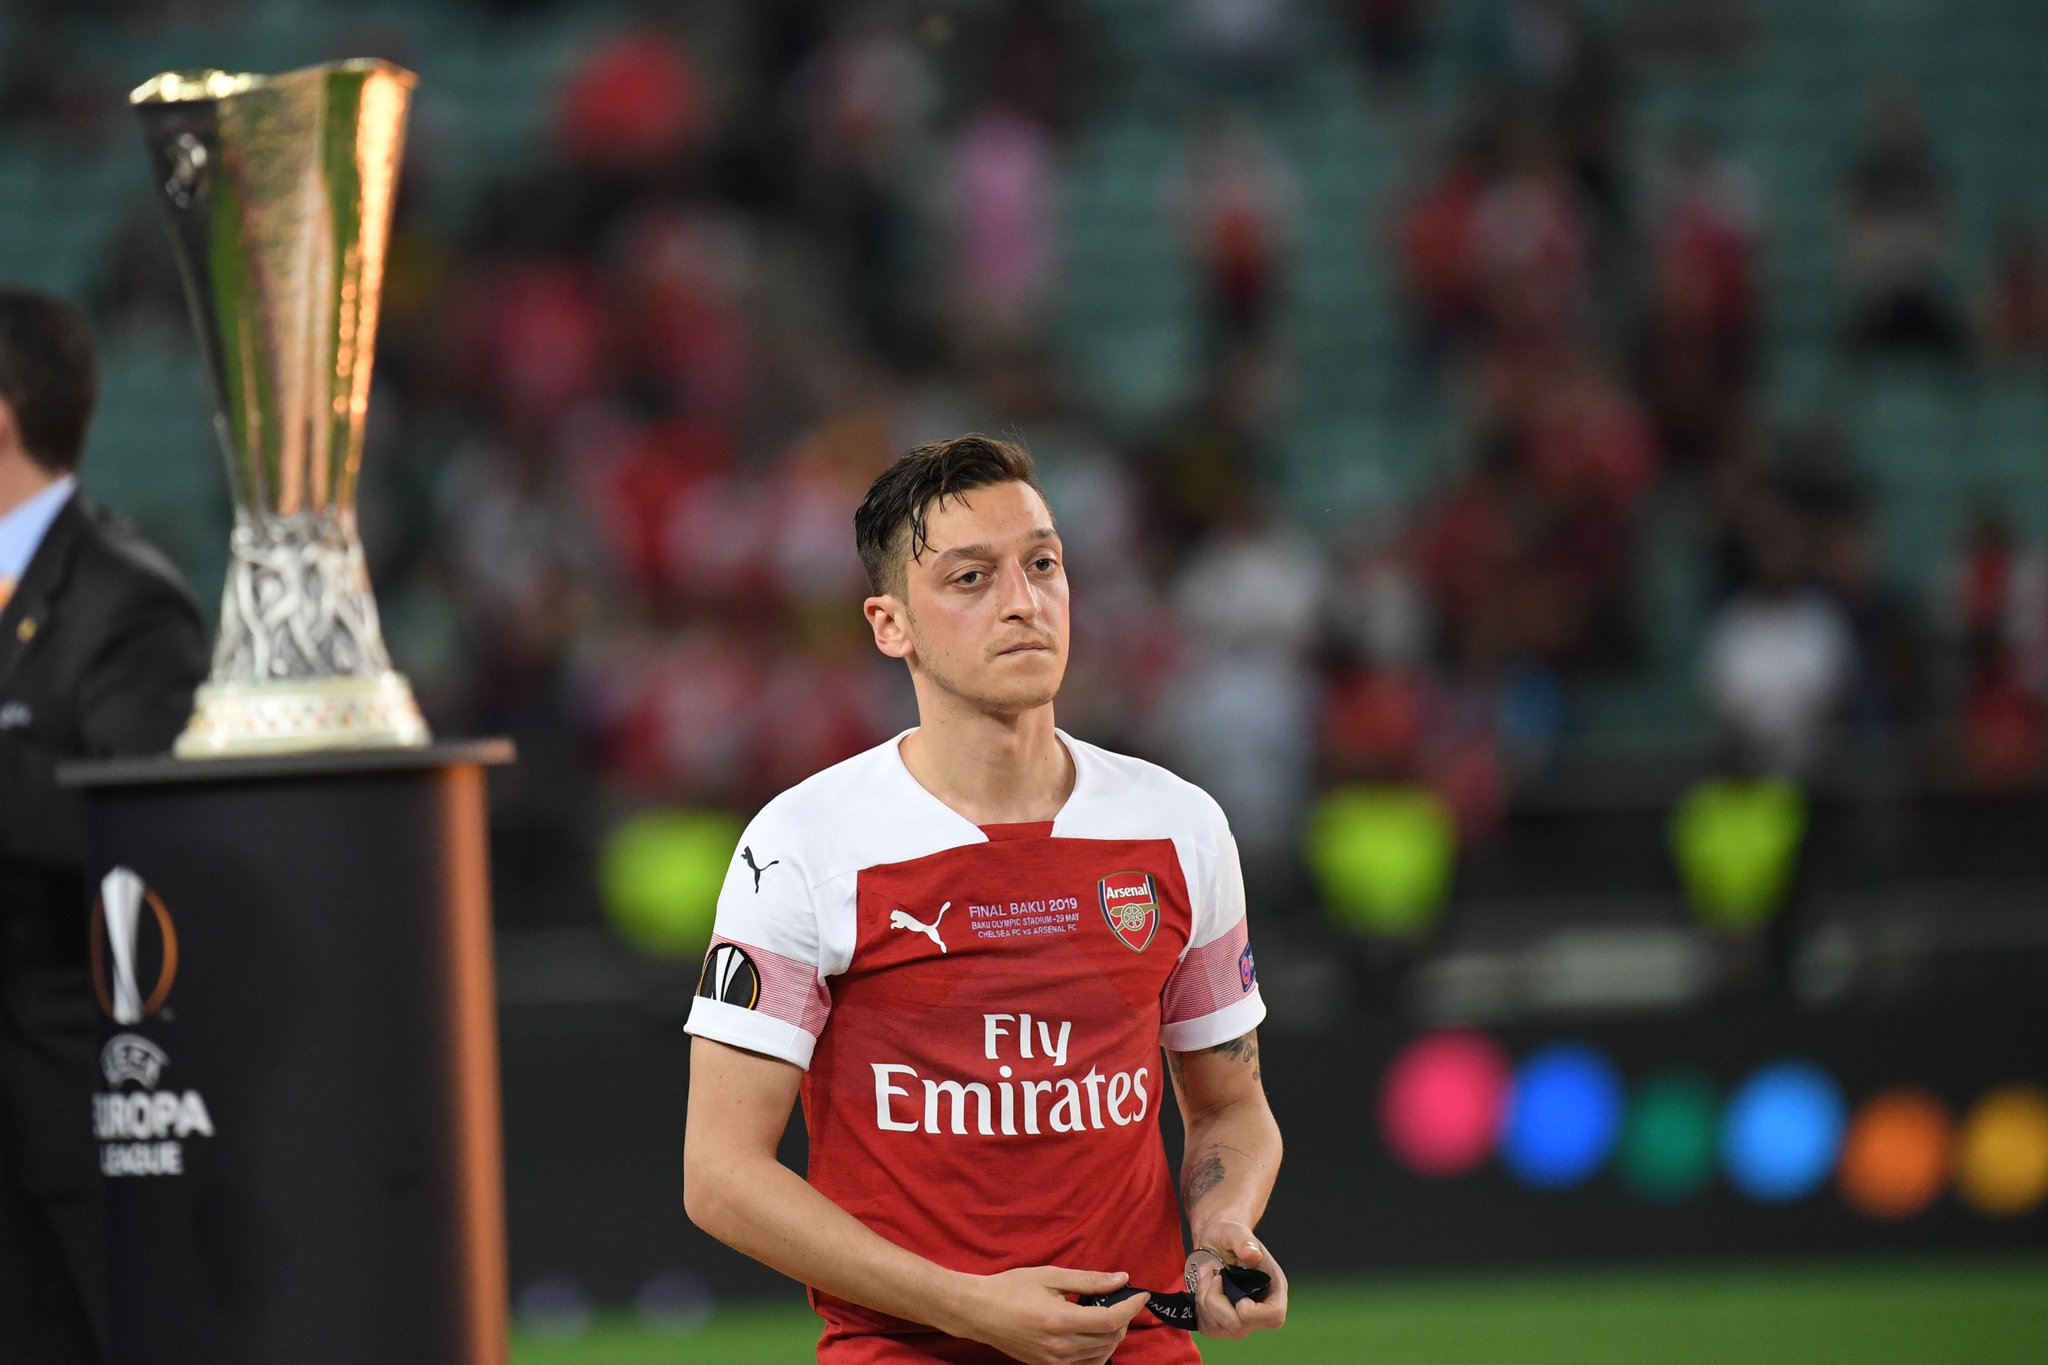 ‘Ozil doesn’t have it in him to be a leader’ – Fabregas questions Arsenal star